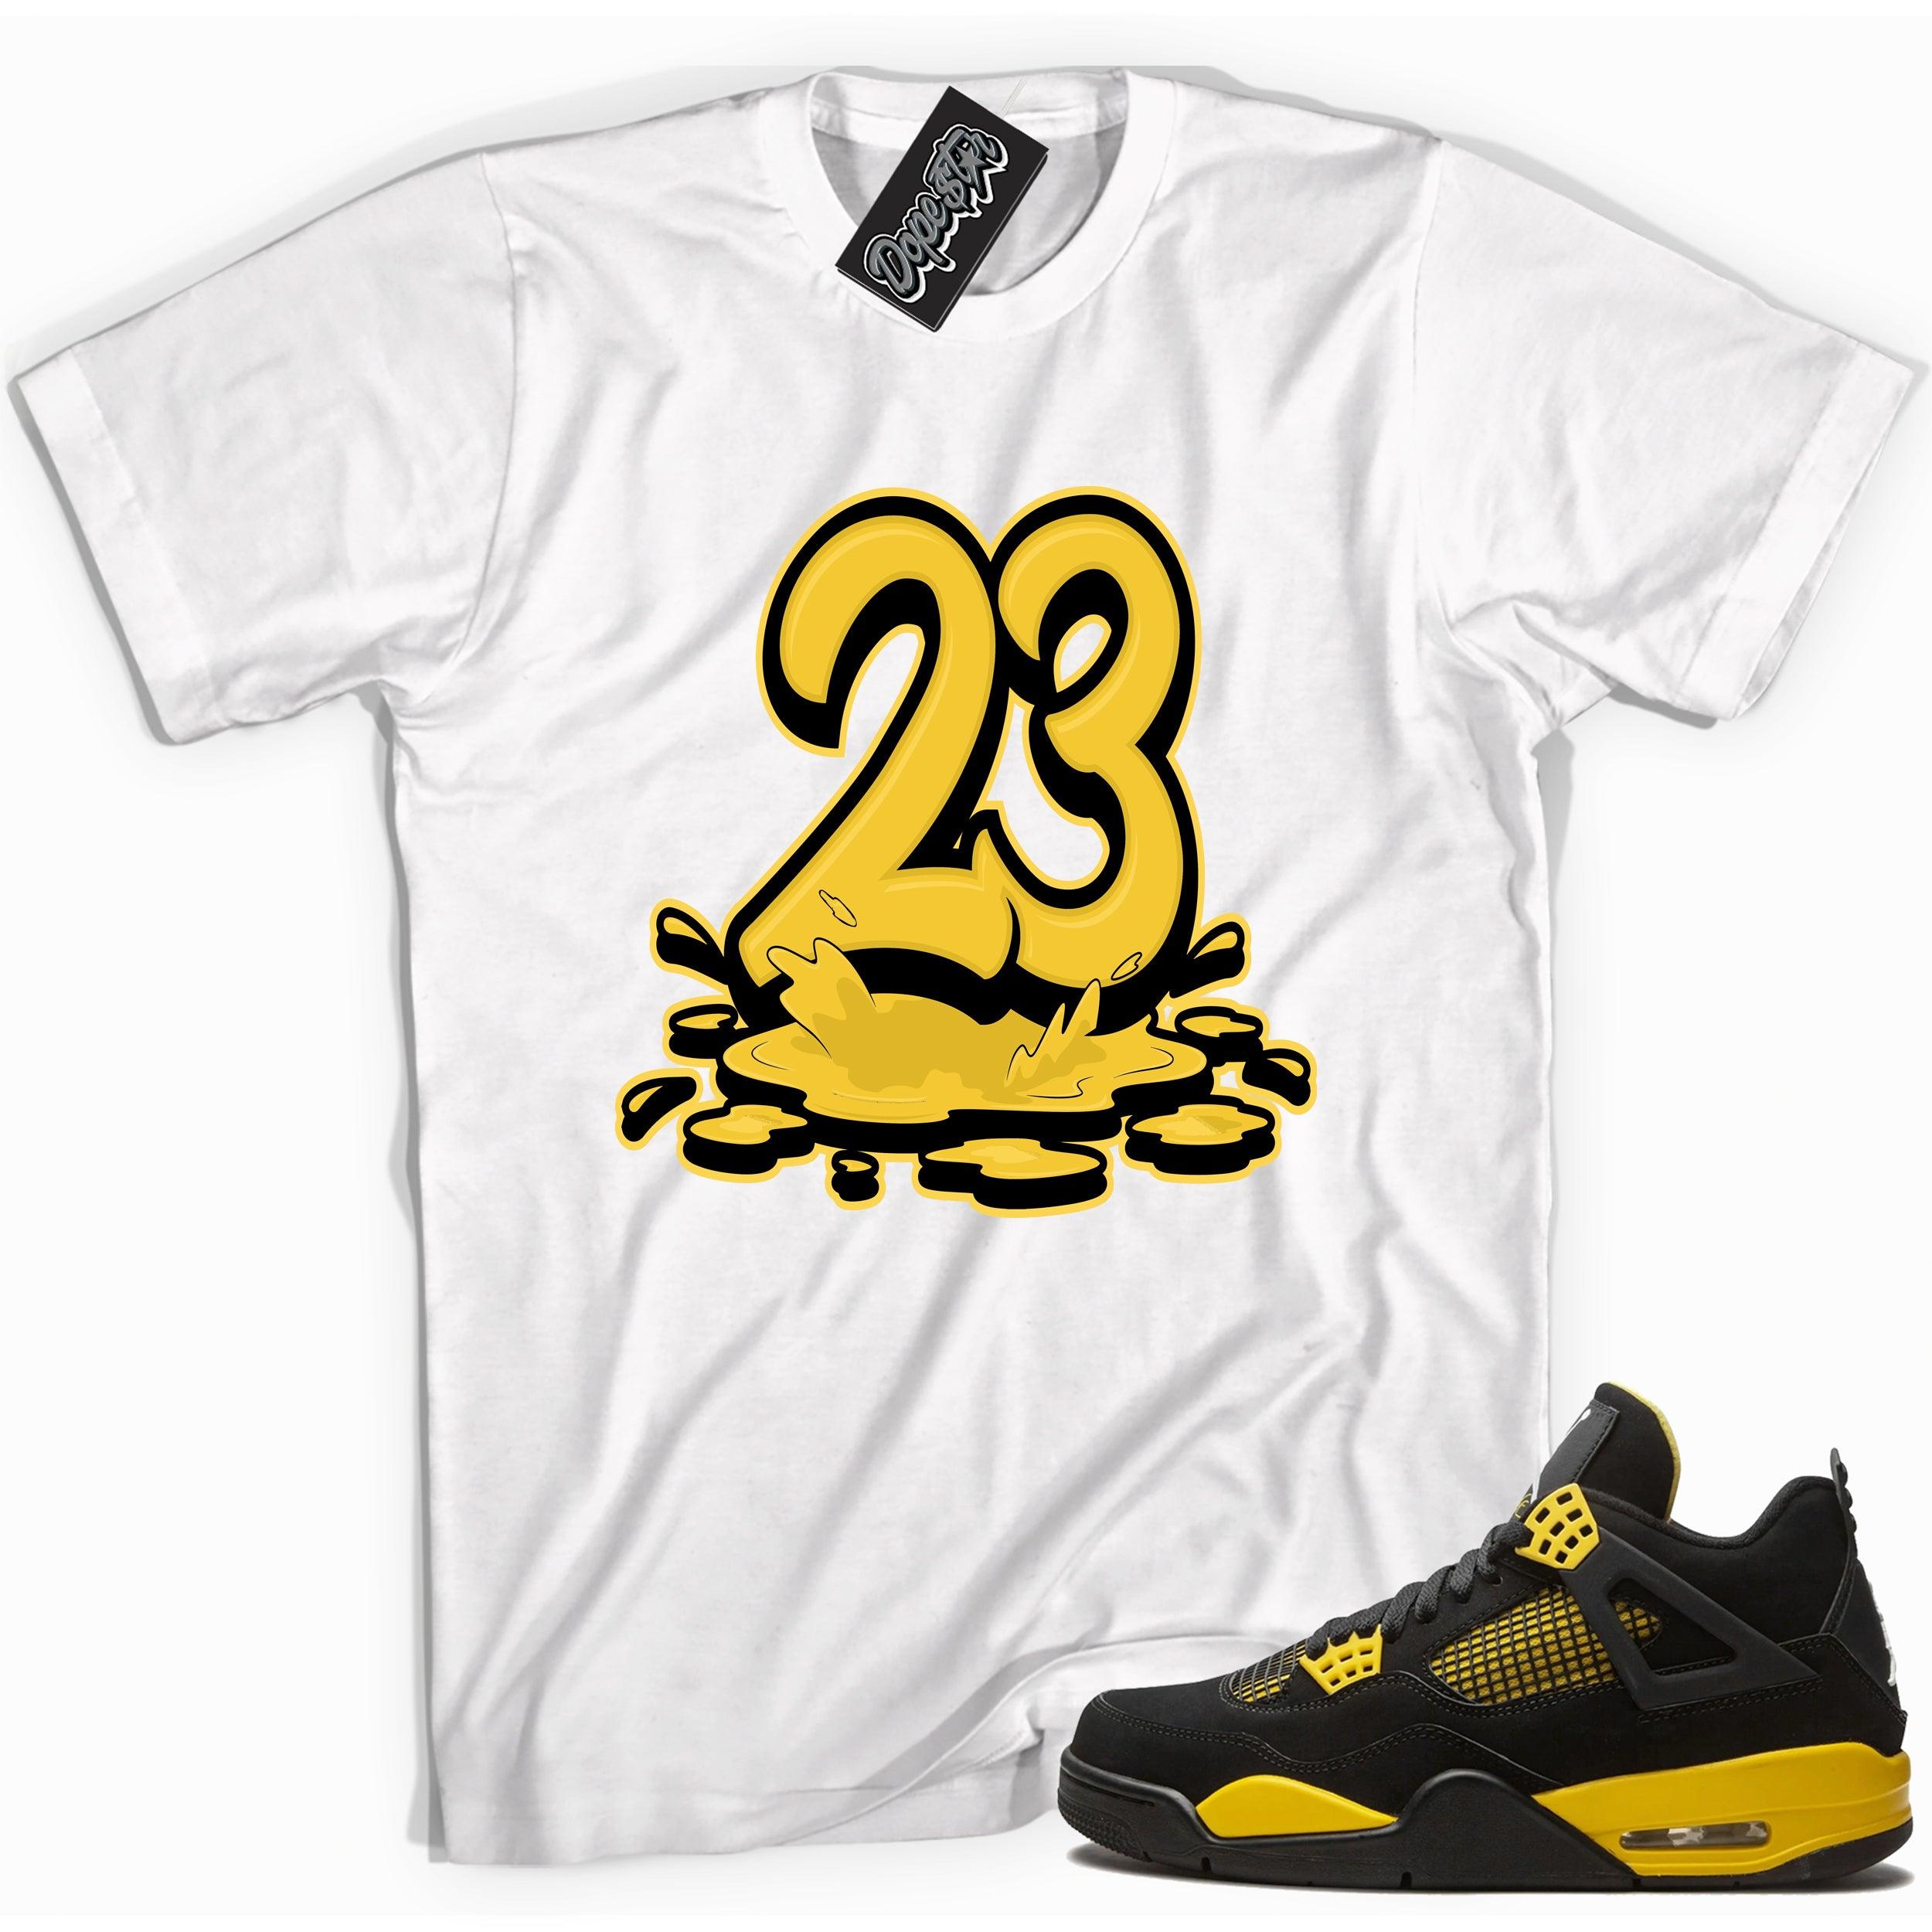 Cool white graphic tee with '23' print, that perfectly matches Air Jordan 4 Thunder sneakers